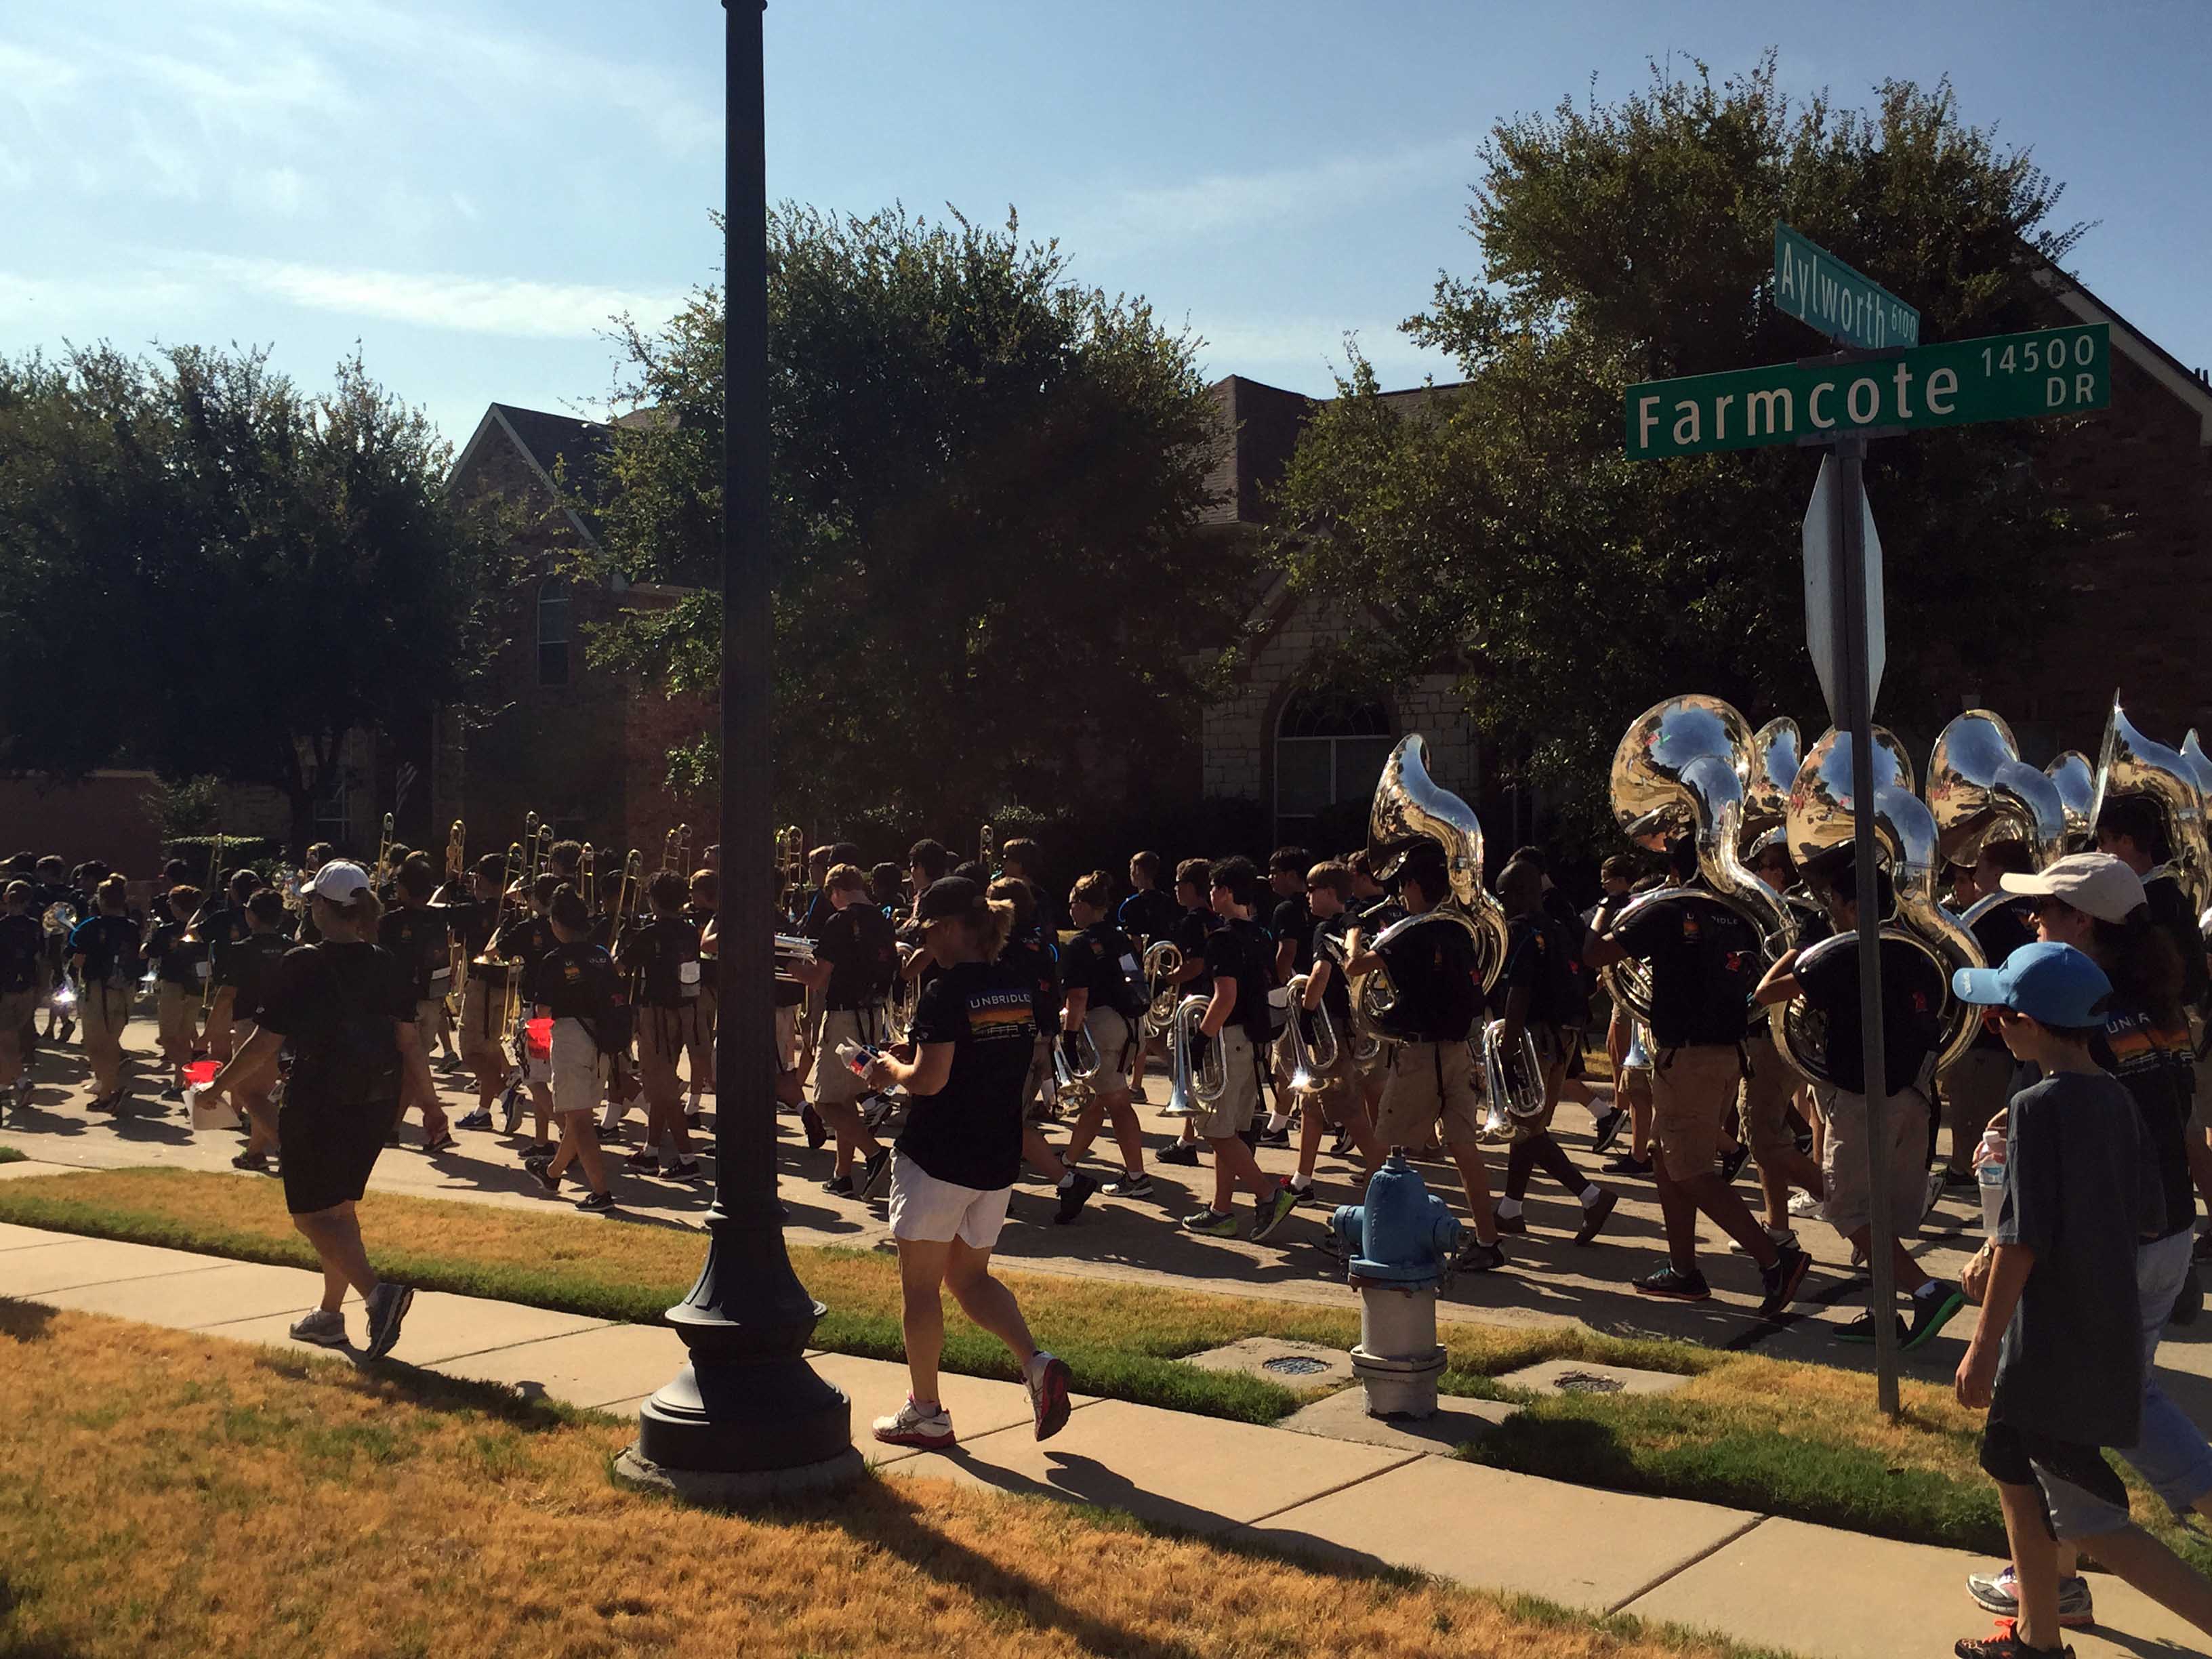 As part of its annual March-a-thon fundraiser, the band spent Saturday morning marching through local neighborhoods including a stroll down Farmcote Drive.